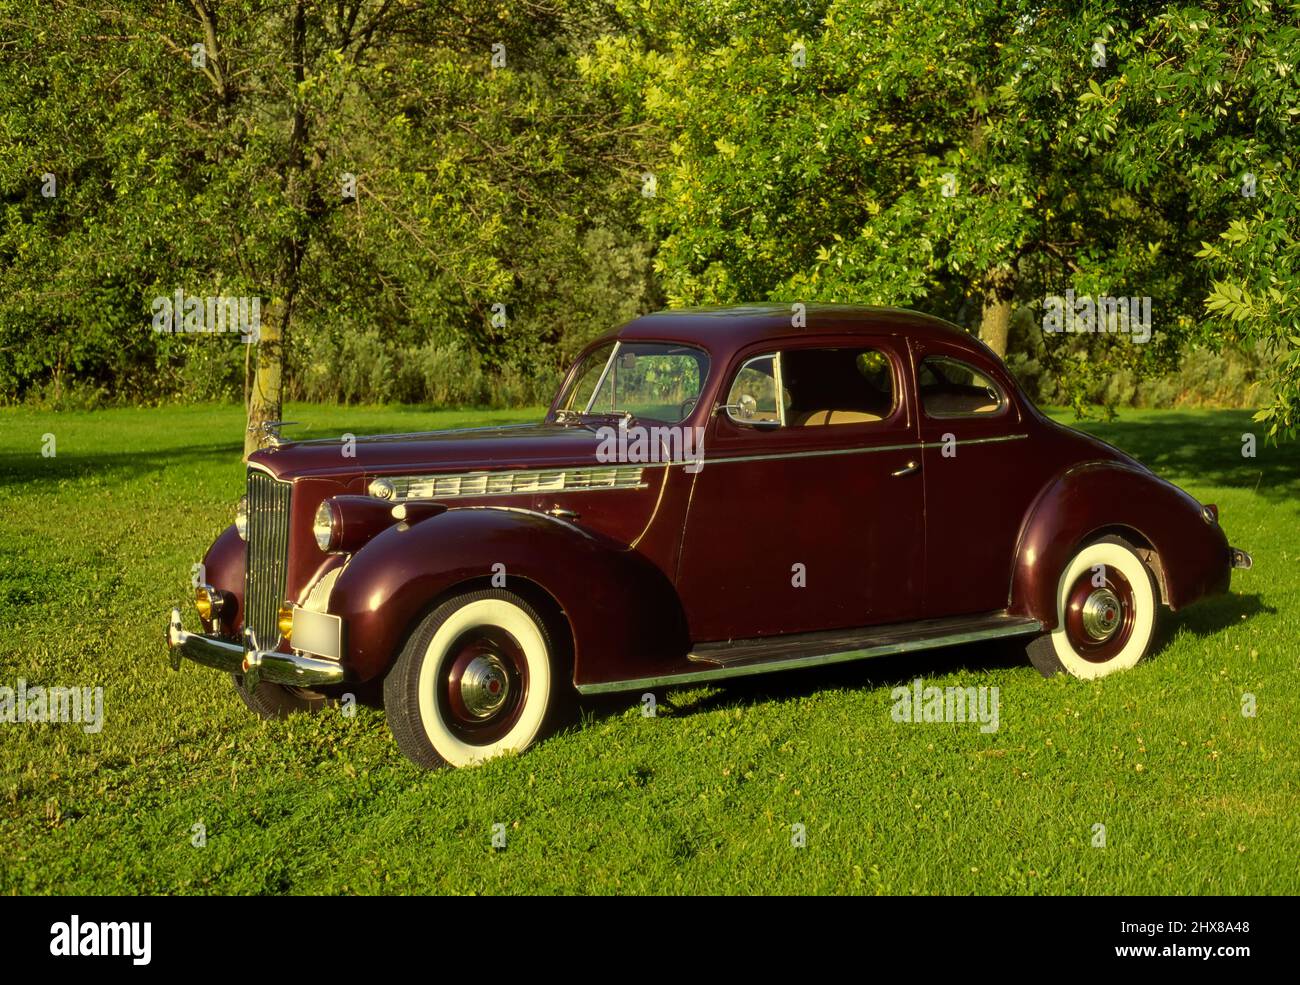 1940 Packard 110 Coupe on grass Stock Photo